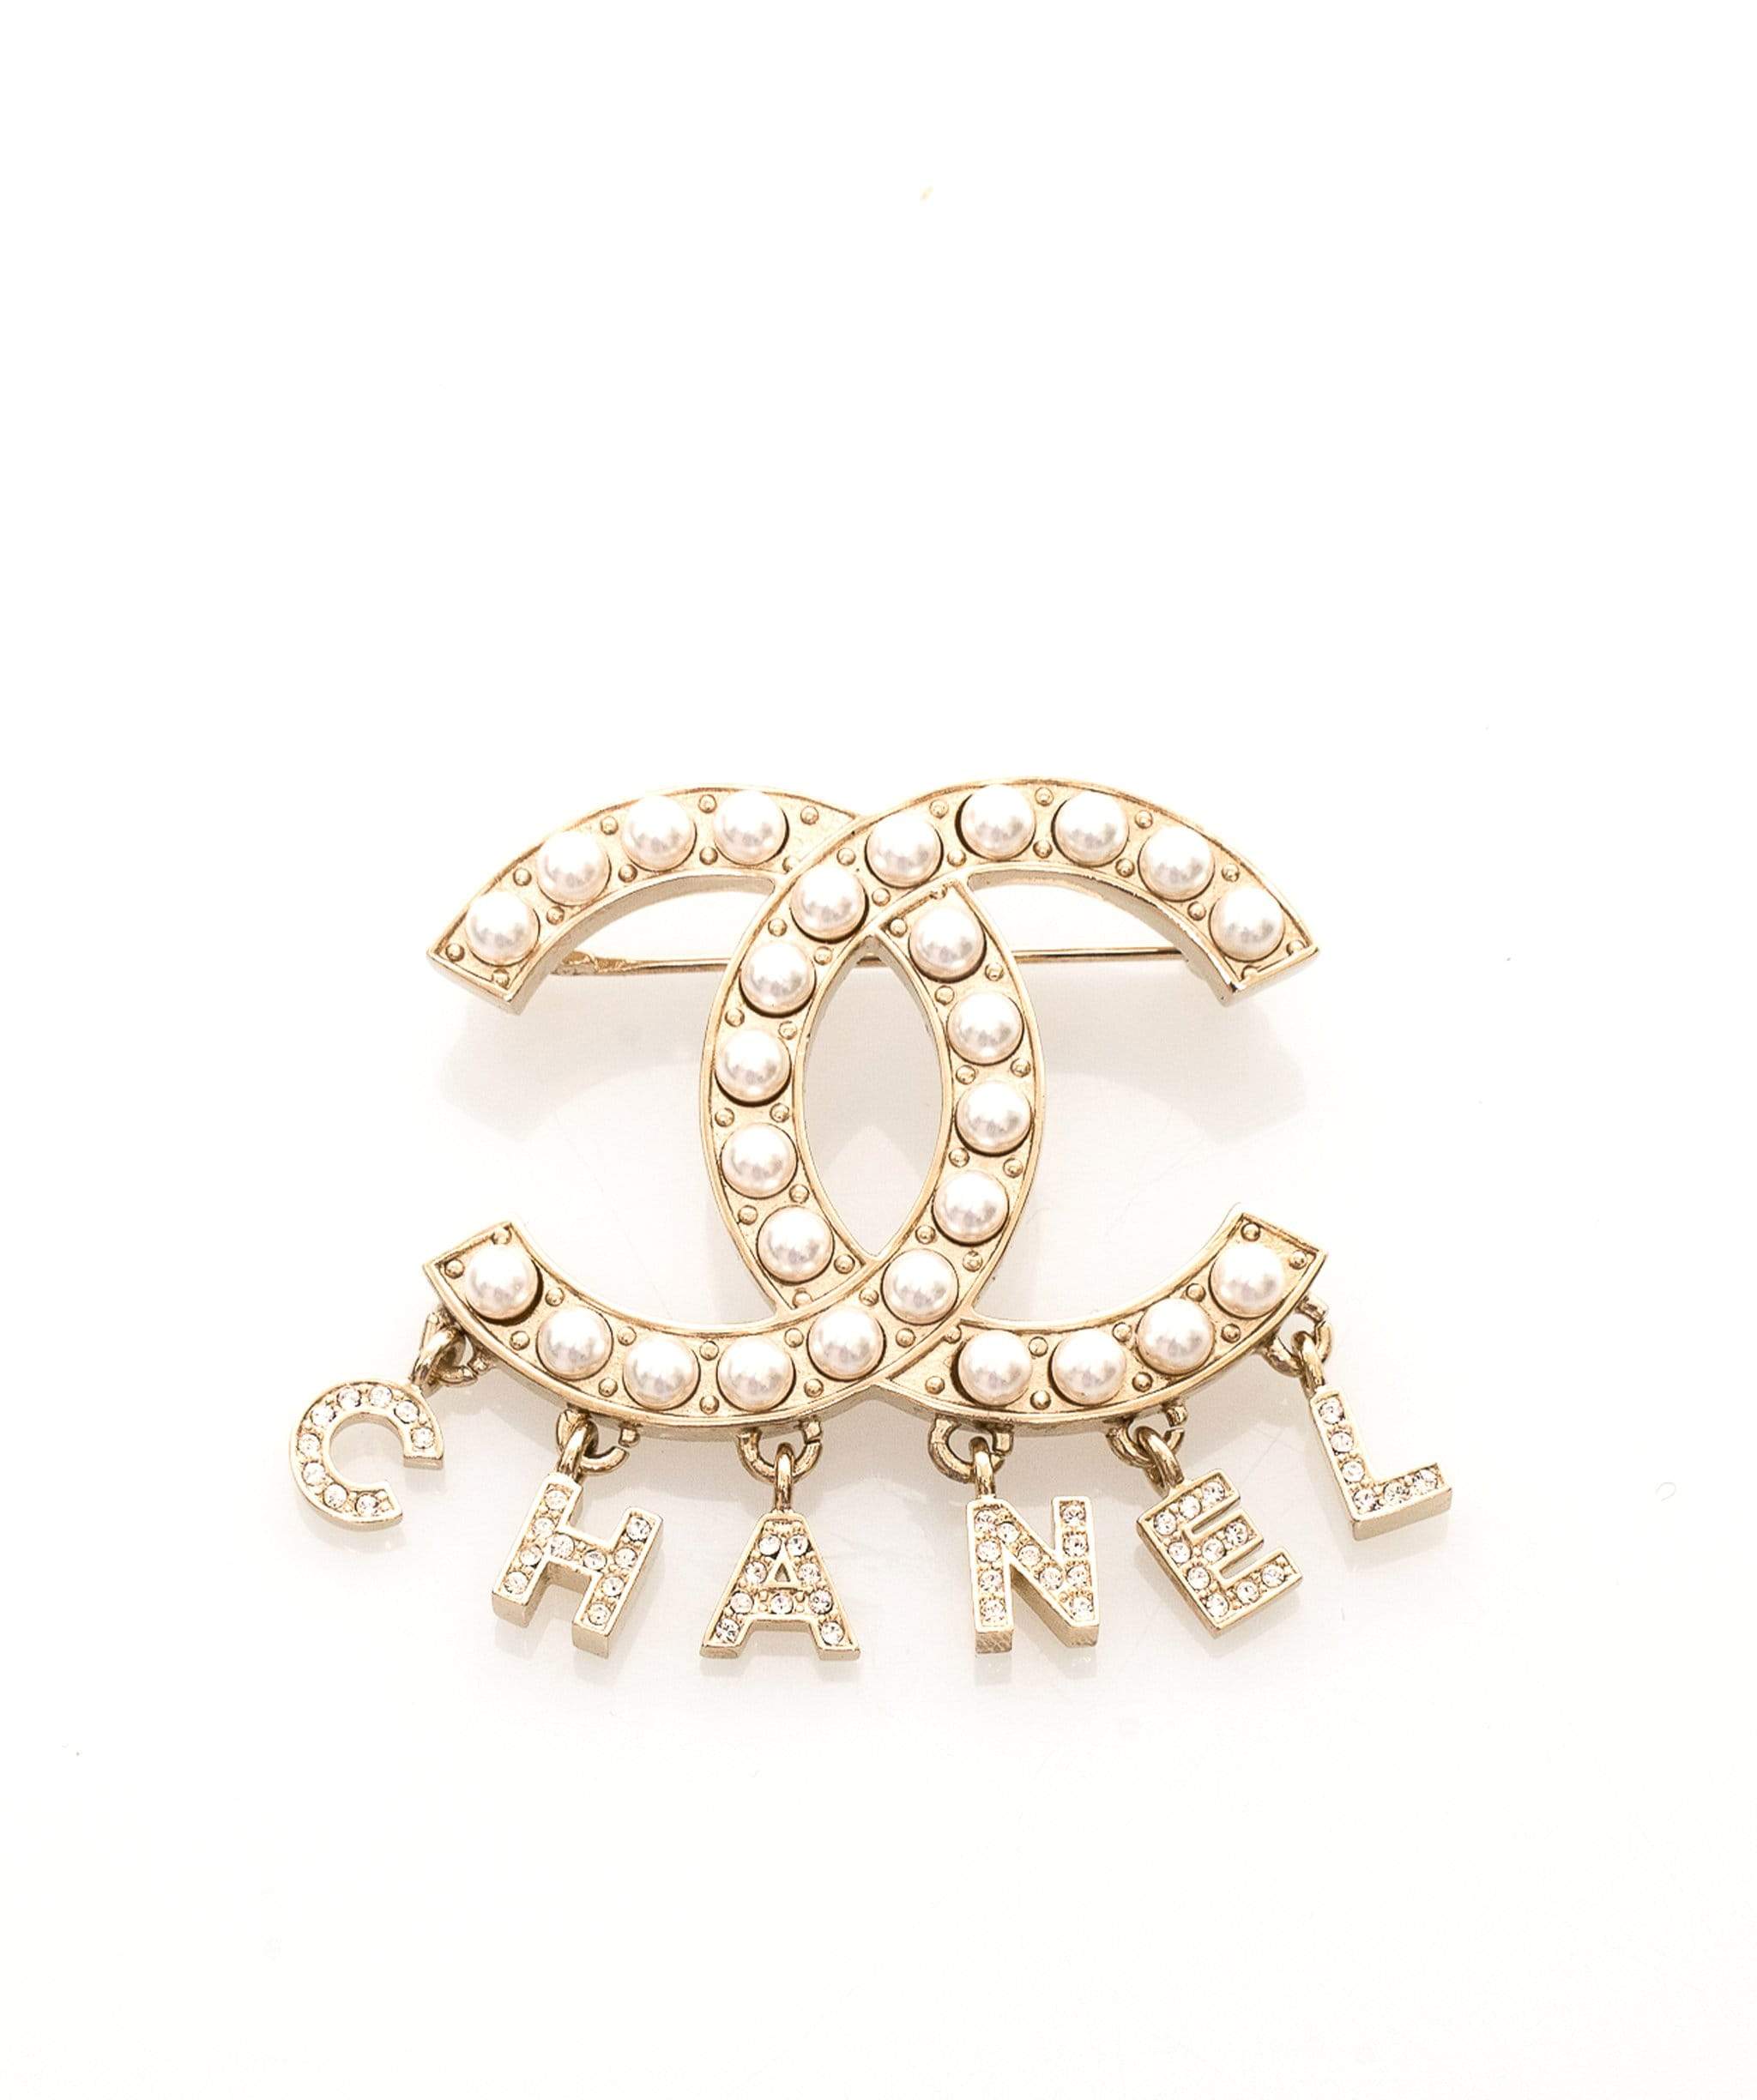 CHANEL, Accessories, Onedaysale Authentic Chanel Brooch